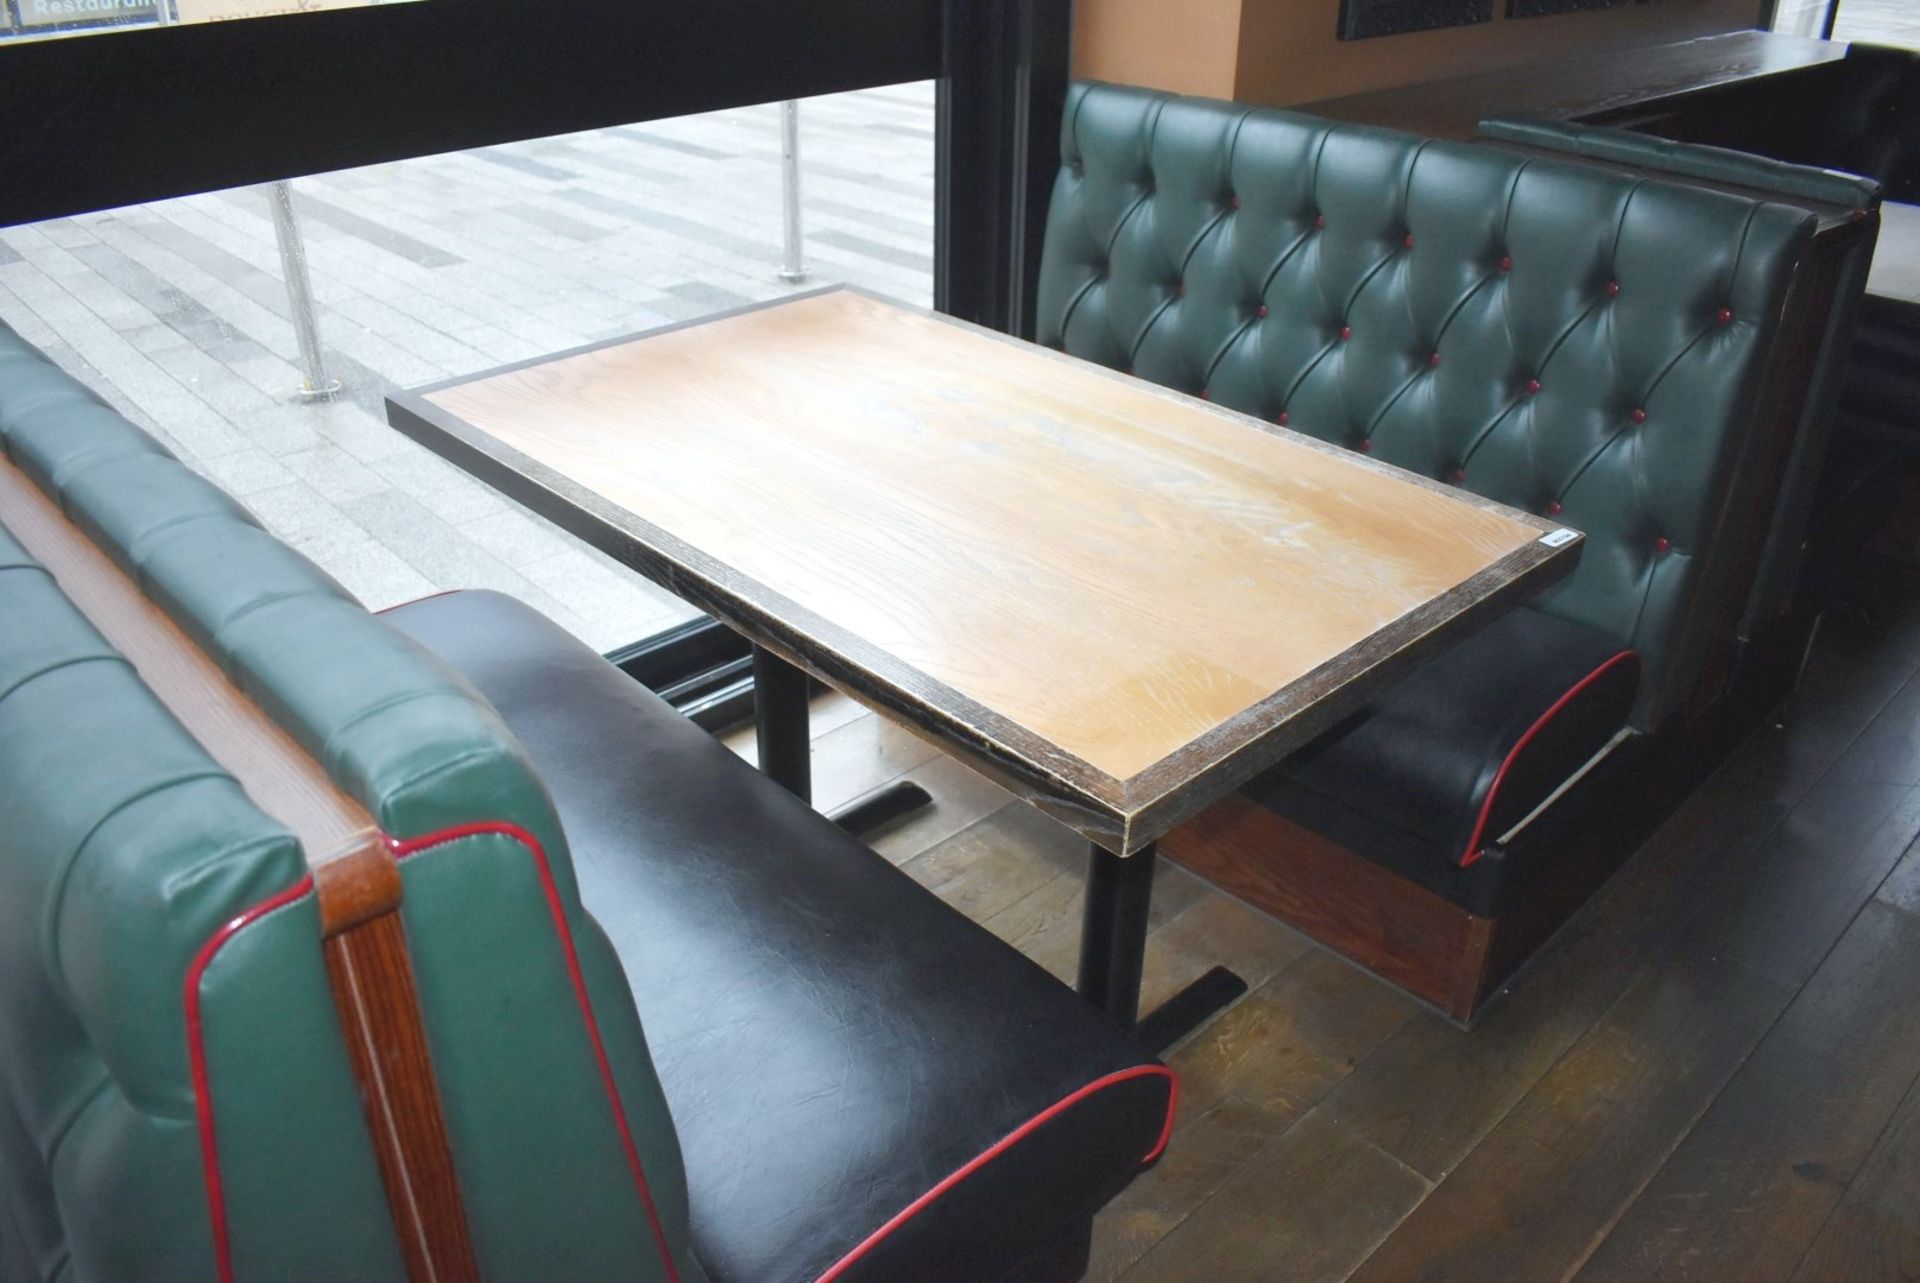 4 x Sections of Restaurant Double Booth Seating - Sits Up to 12 Persons - Green & Black Upholstery - Image 9 of 24